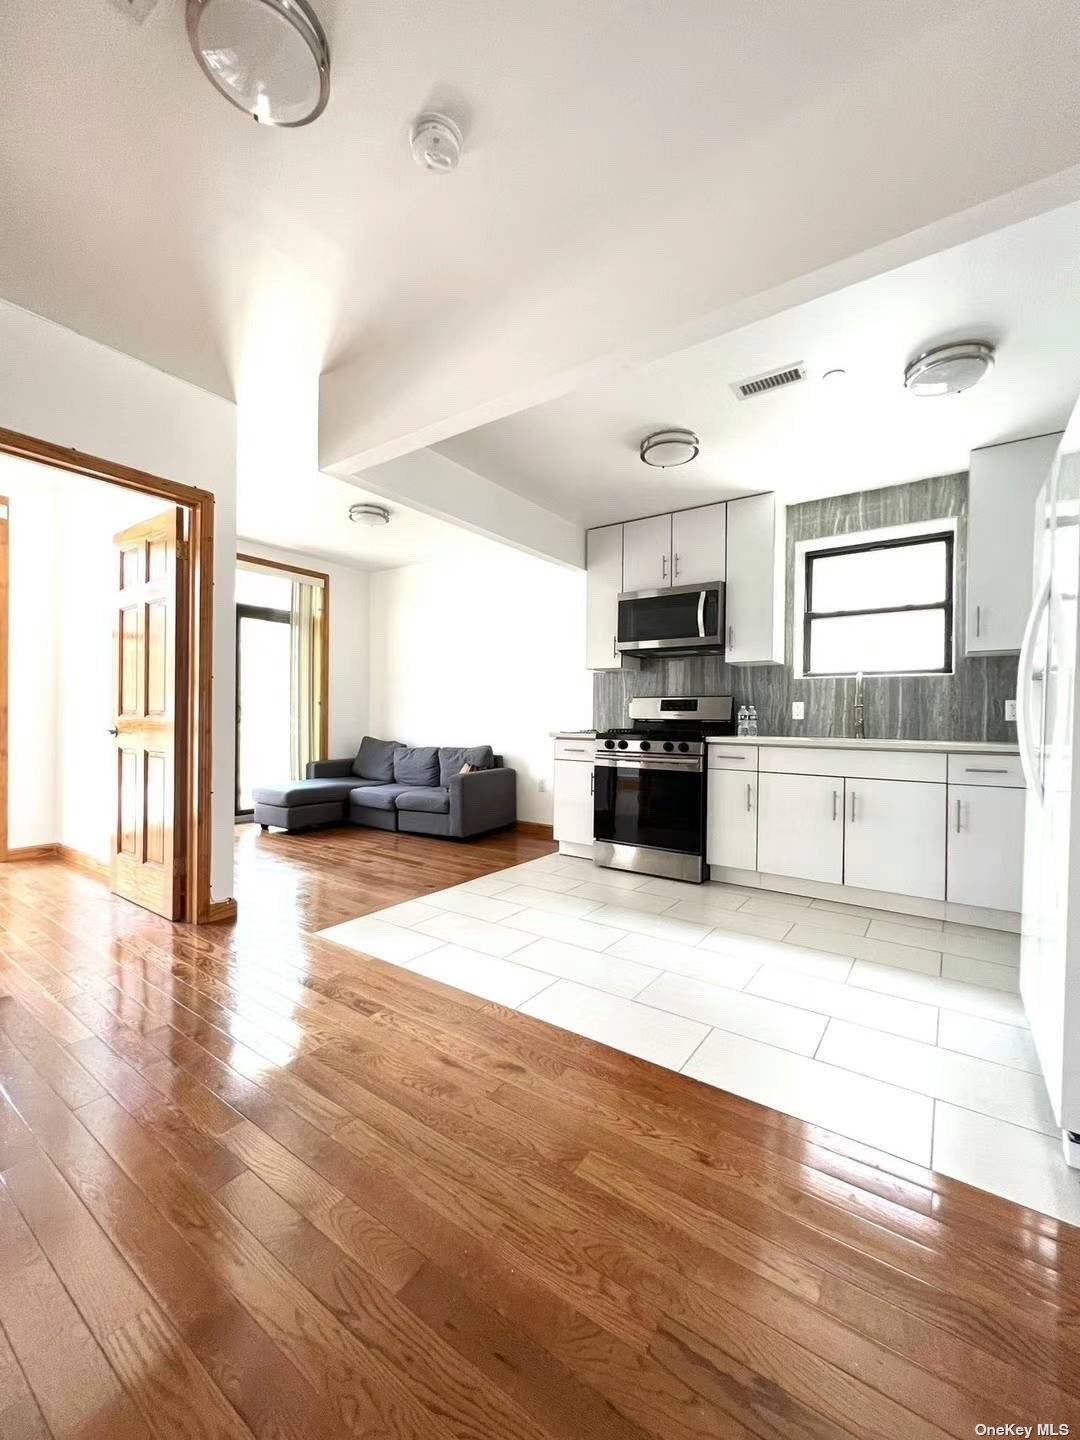 Welcome to this beautiful and bright 3 Bedrooms, 2 Baths, and 2 Balconies apartment that One Car Parking, Laundry Units amp ; Basement storage space is included !